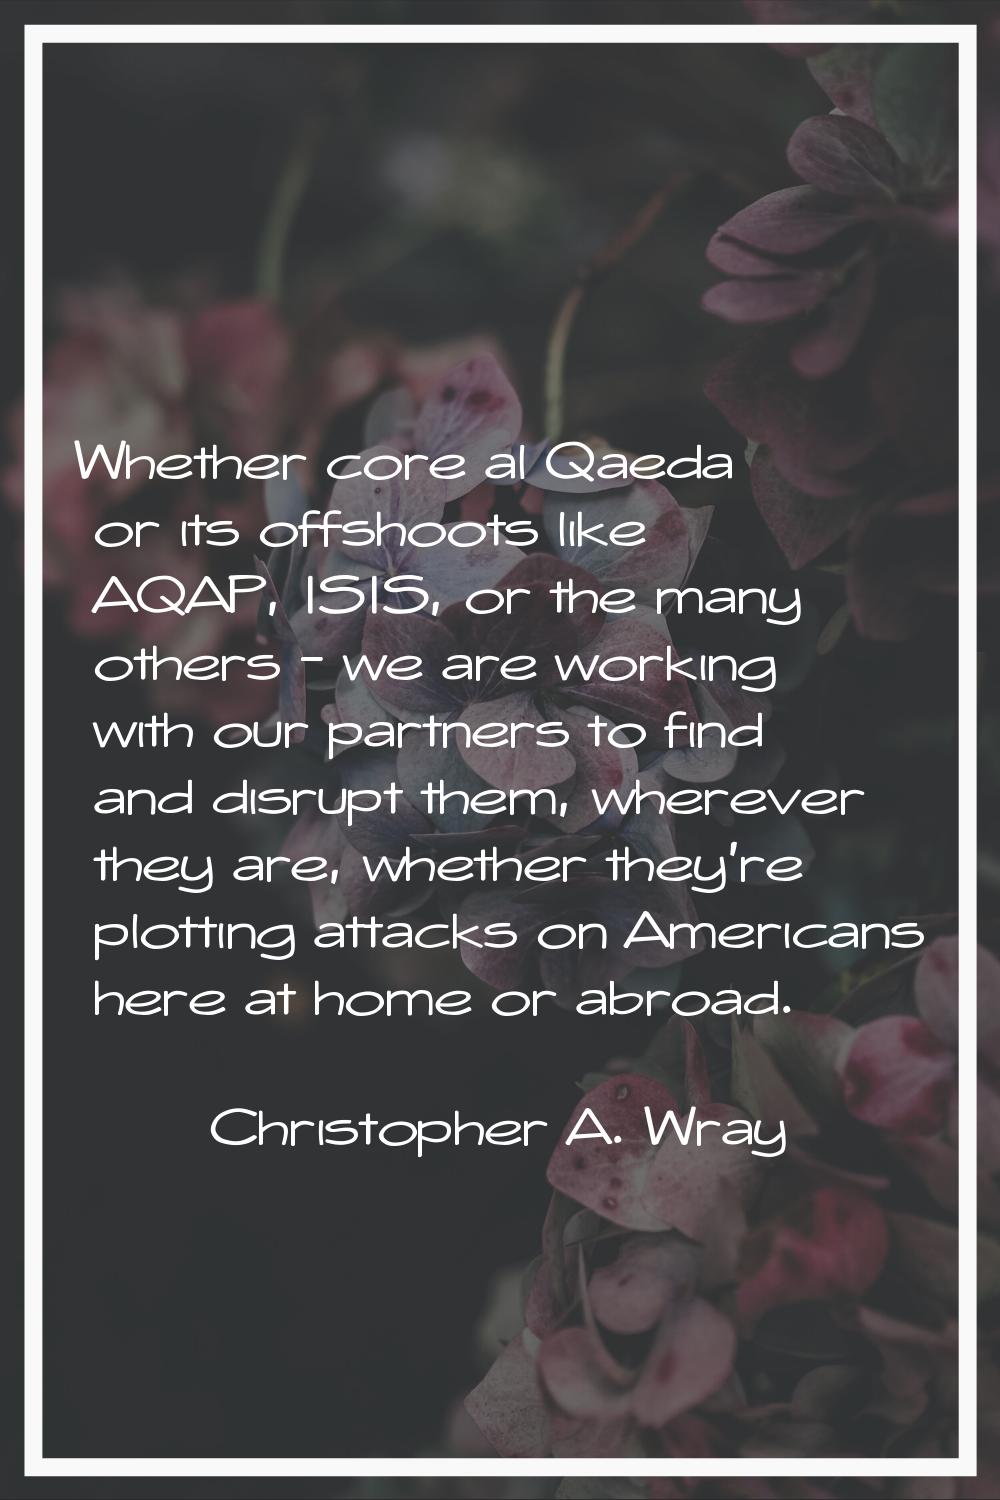 Whether core al Qaeda or its offshoots like AQAP, ISIS, or the many others - we are working with ou